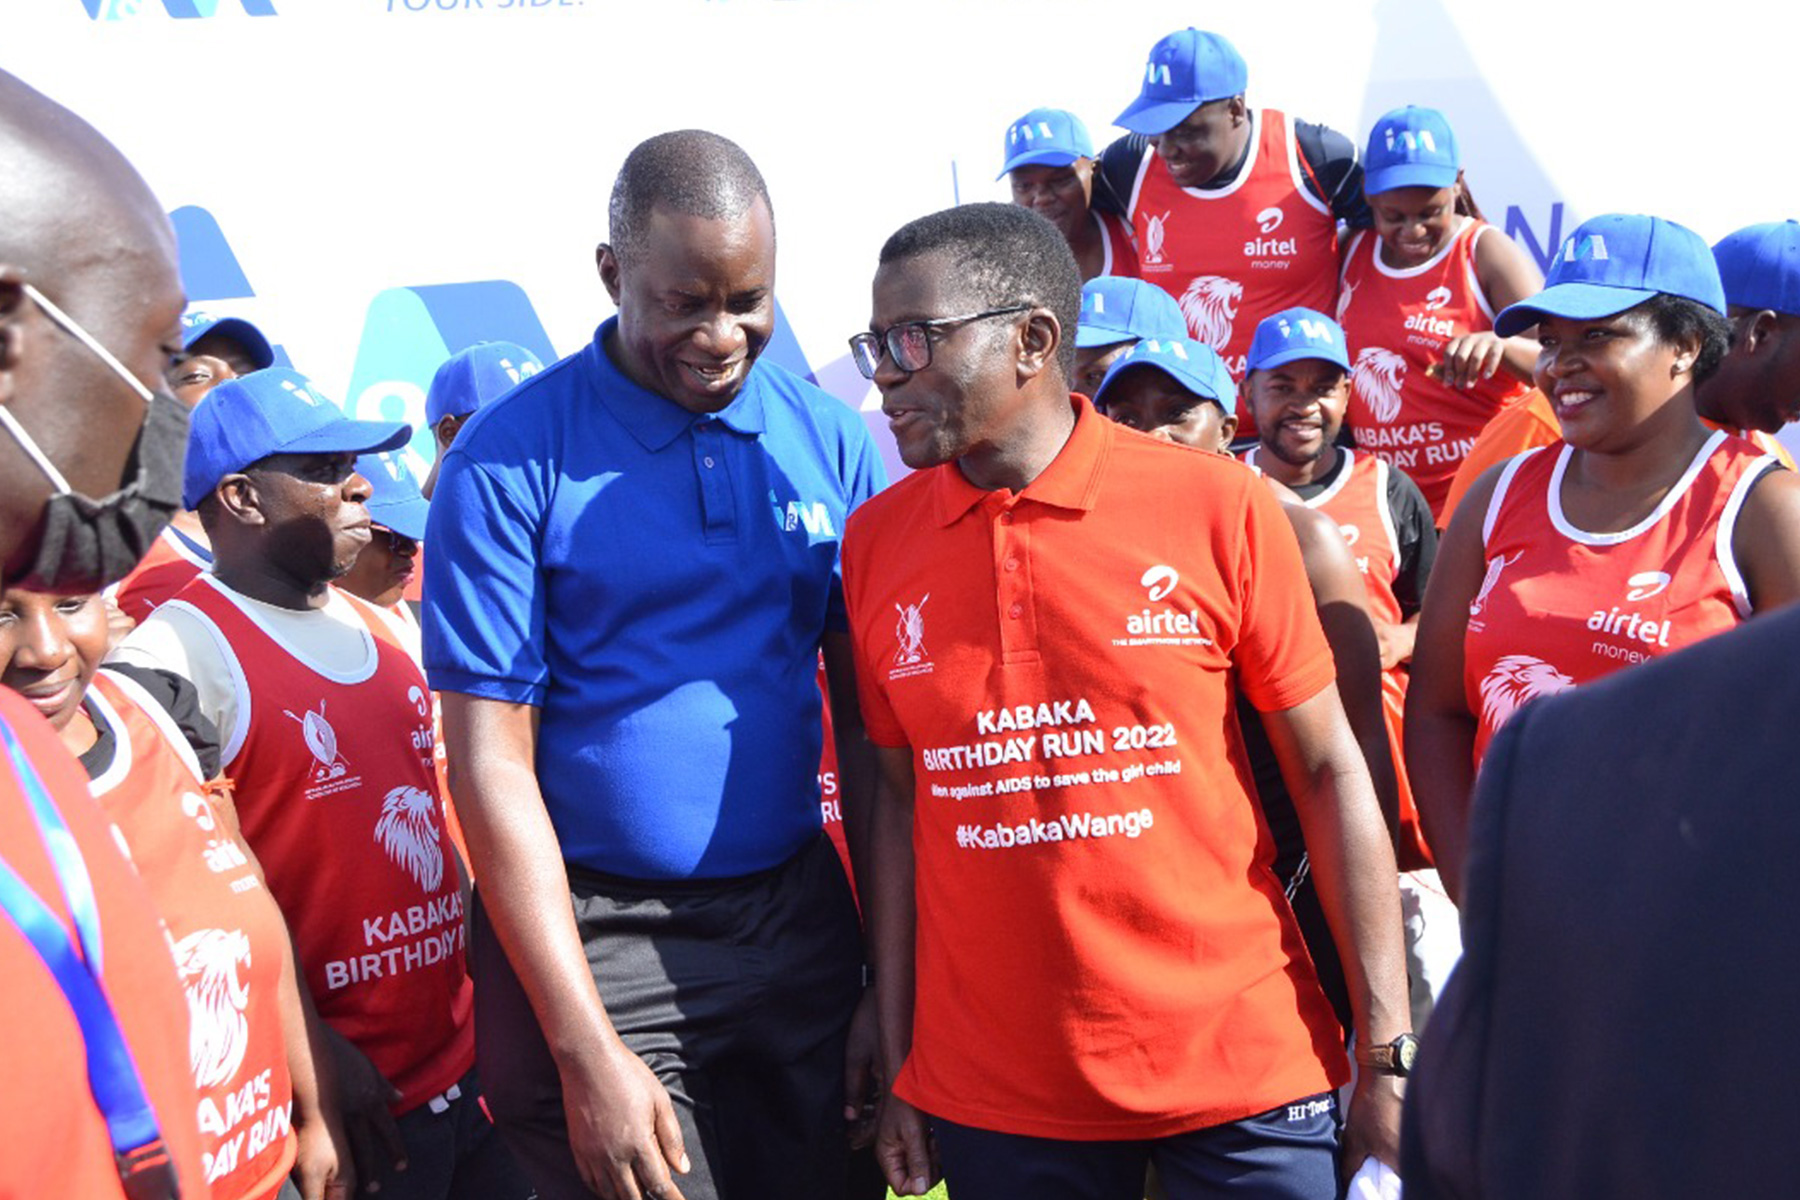 I&M Bank Joins Kabaka’s Birthday Run in the Fight Against HIV/AIDS